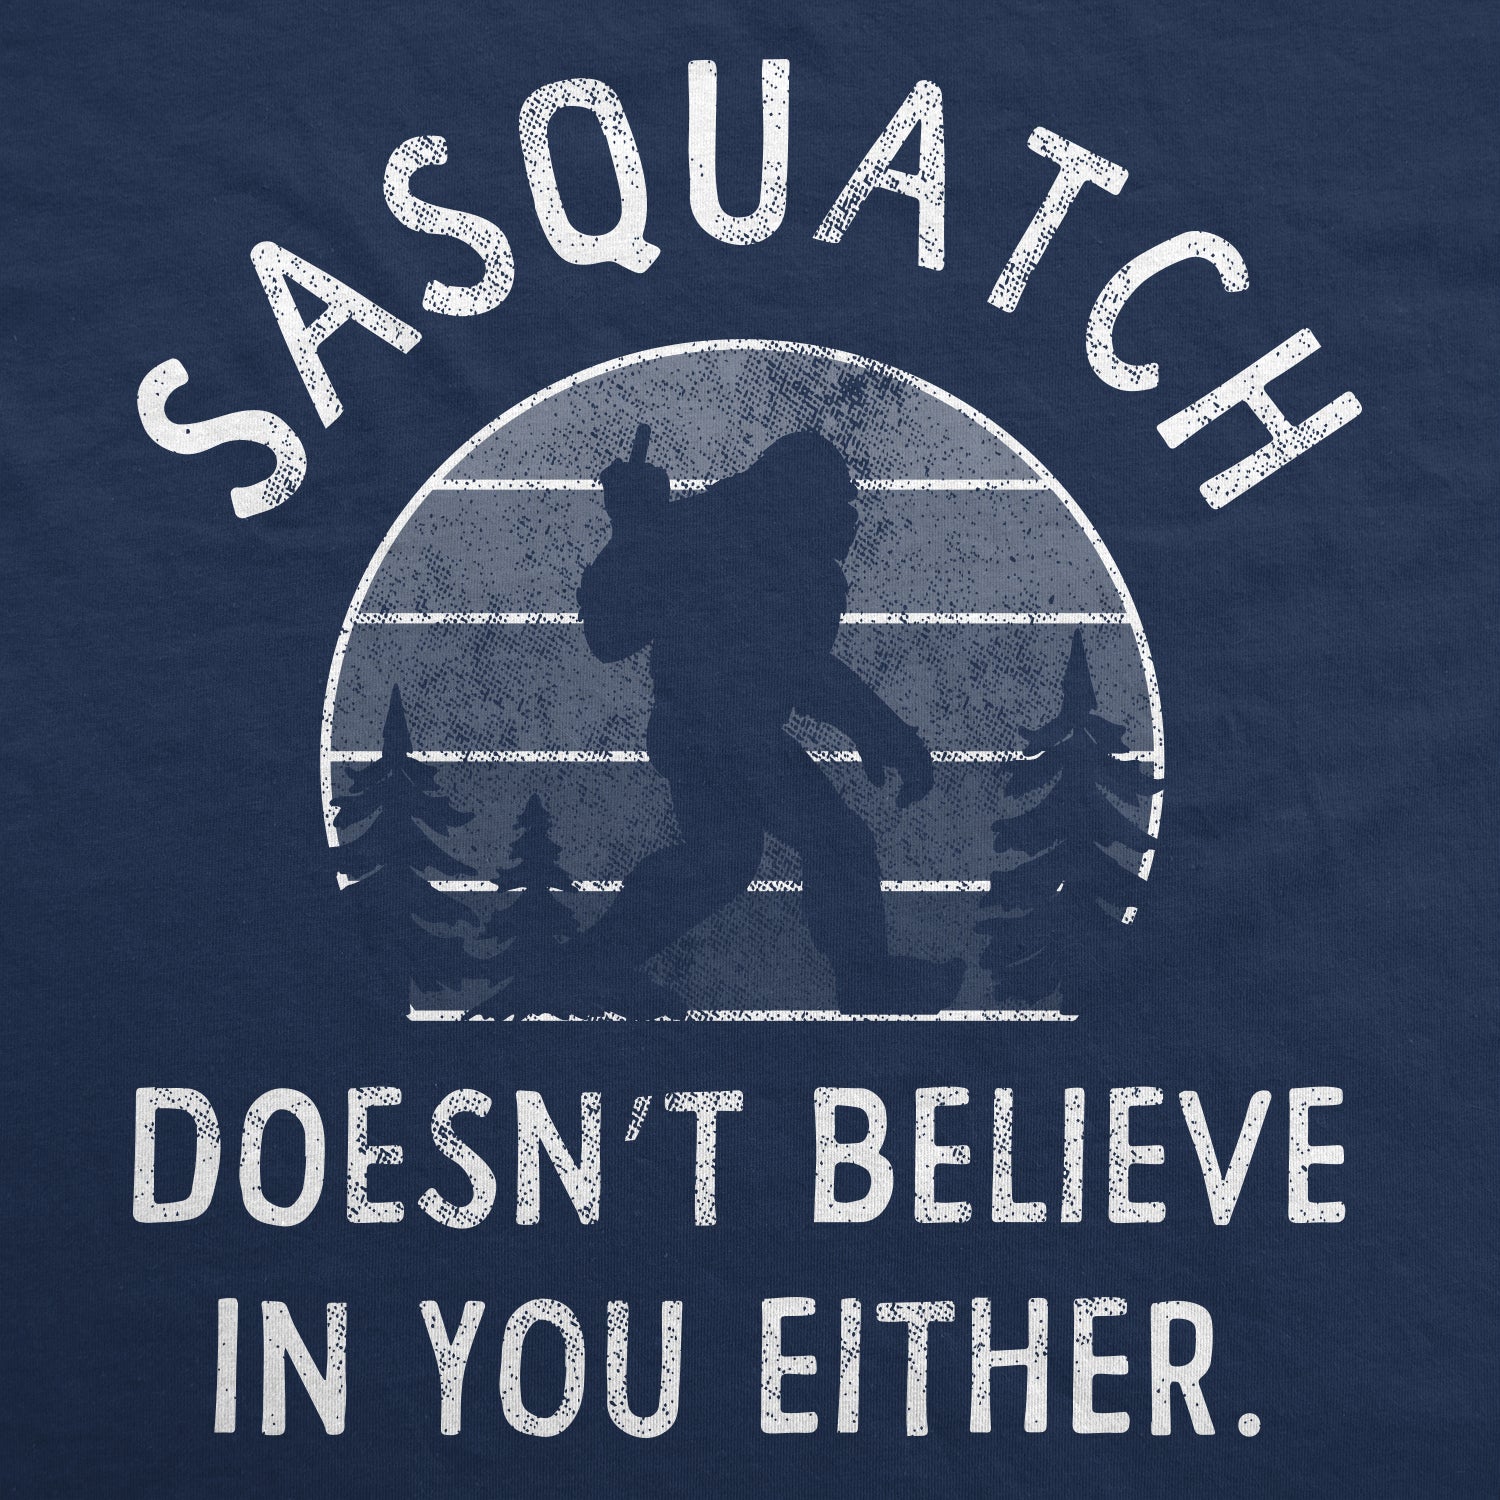 Funny Navy - Sasquatch Sasquatch Doesnt Believe In You Either Hoodie Nerdy Sarcastic Tee